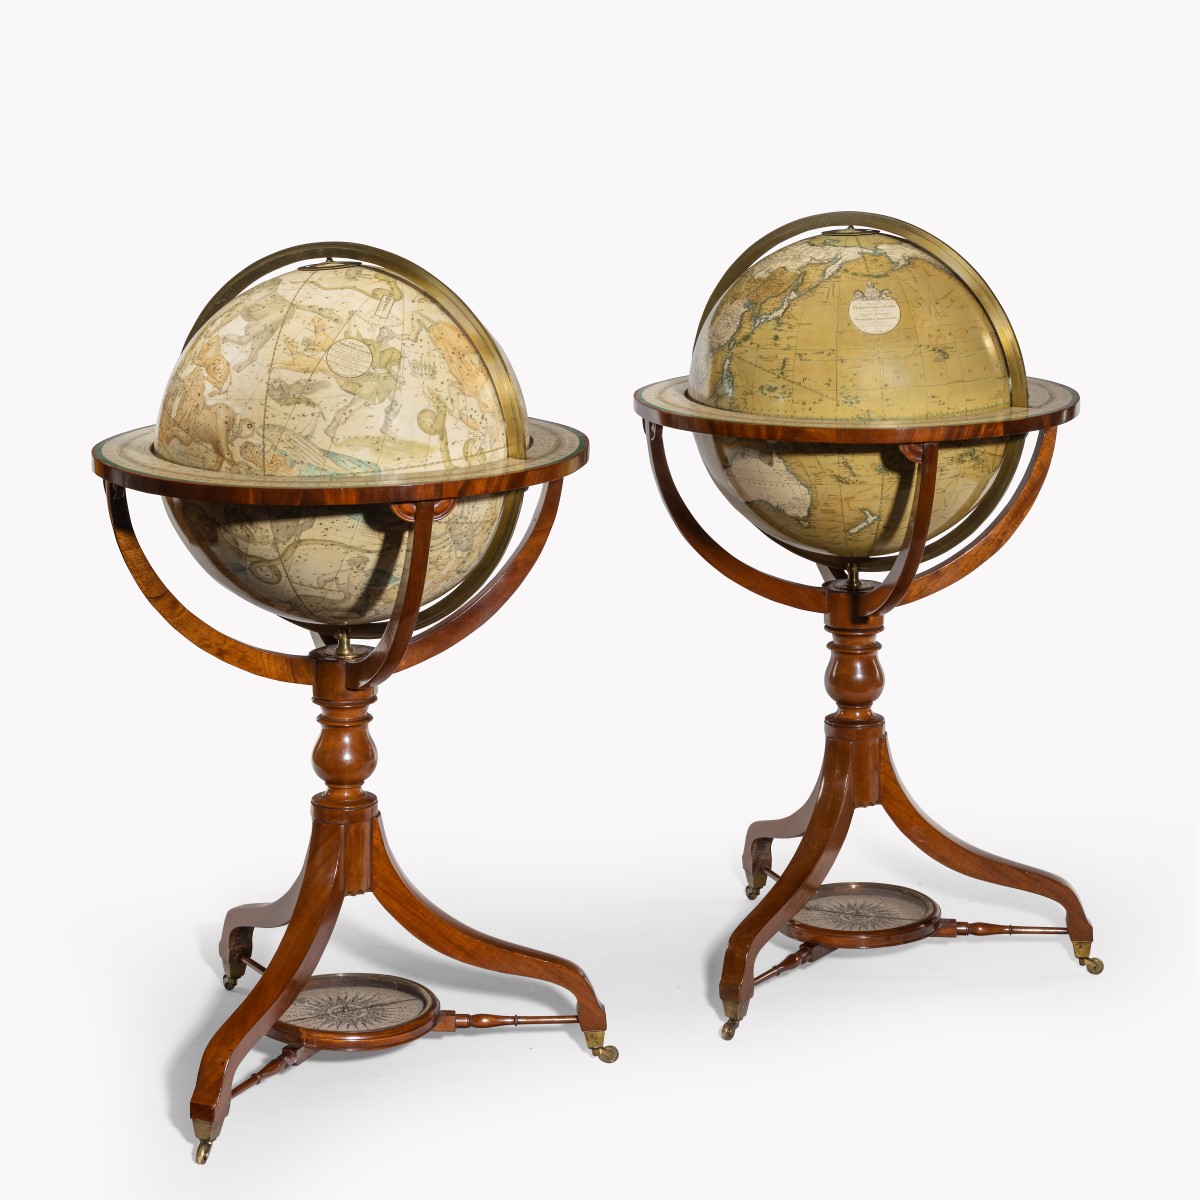 A pair of 18 inch floor standing globes by C Smith & Son